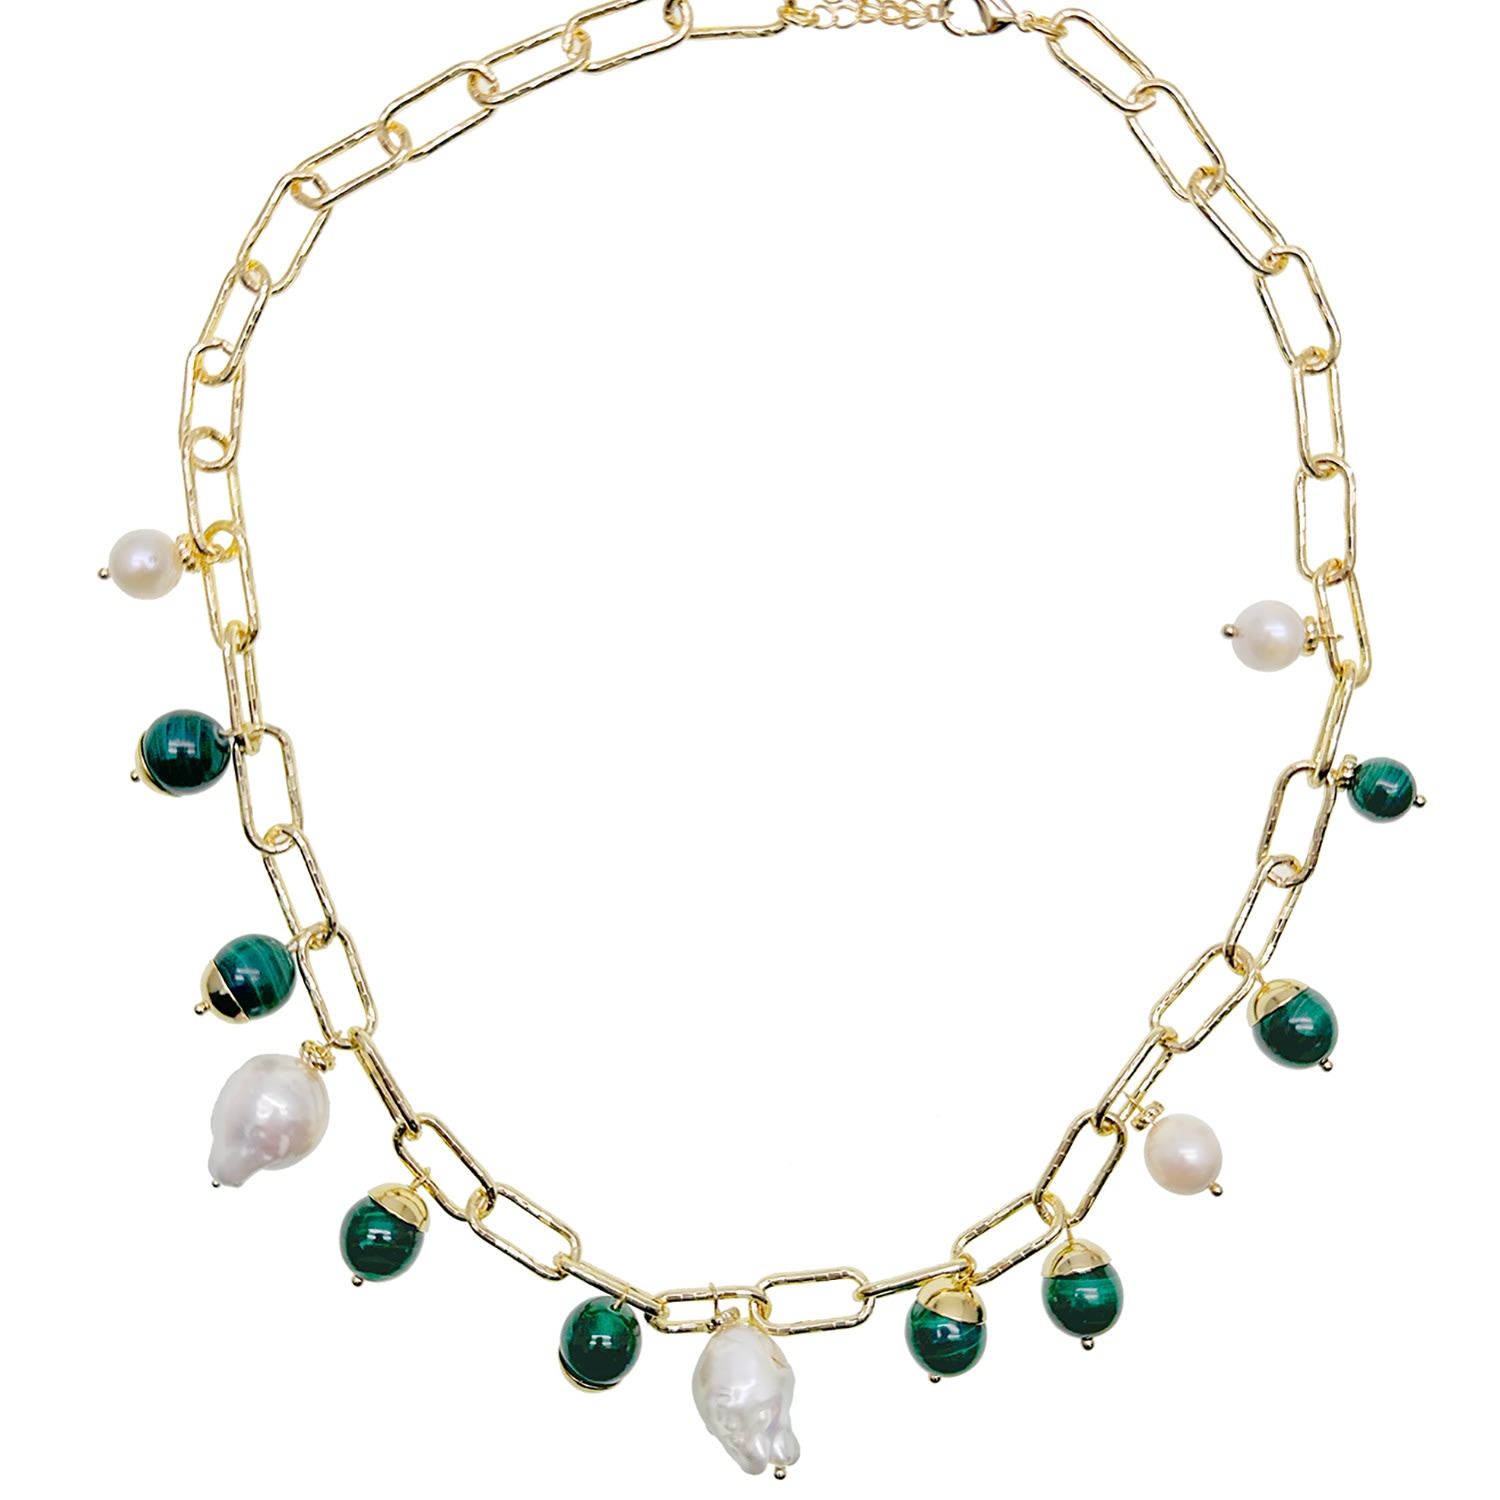 Women’s Green Malachite With Freshwater Pearls Chic Necklace Farra